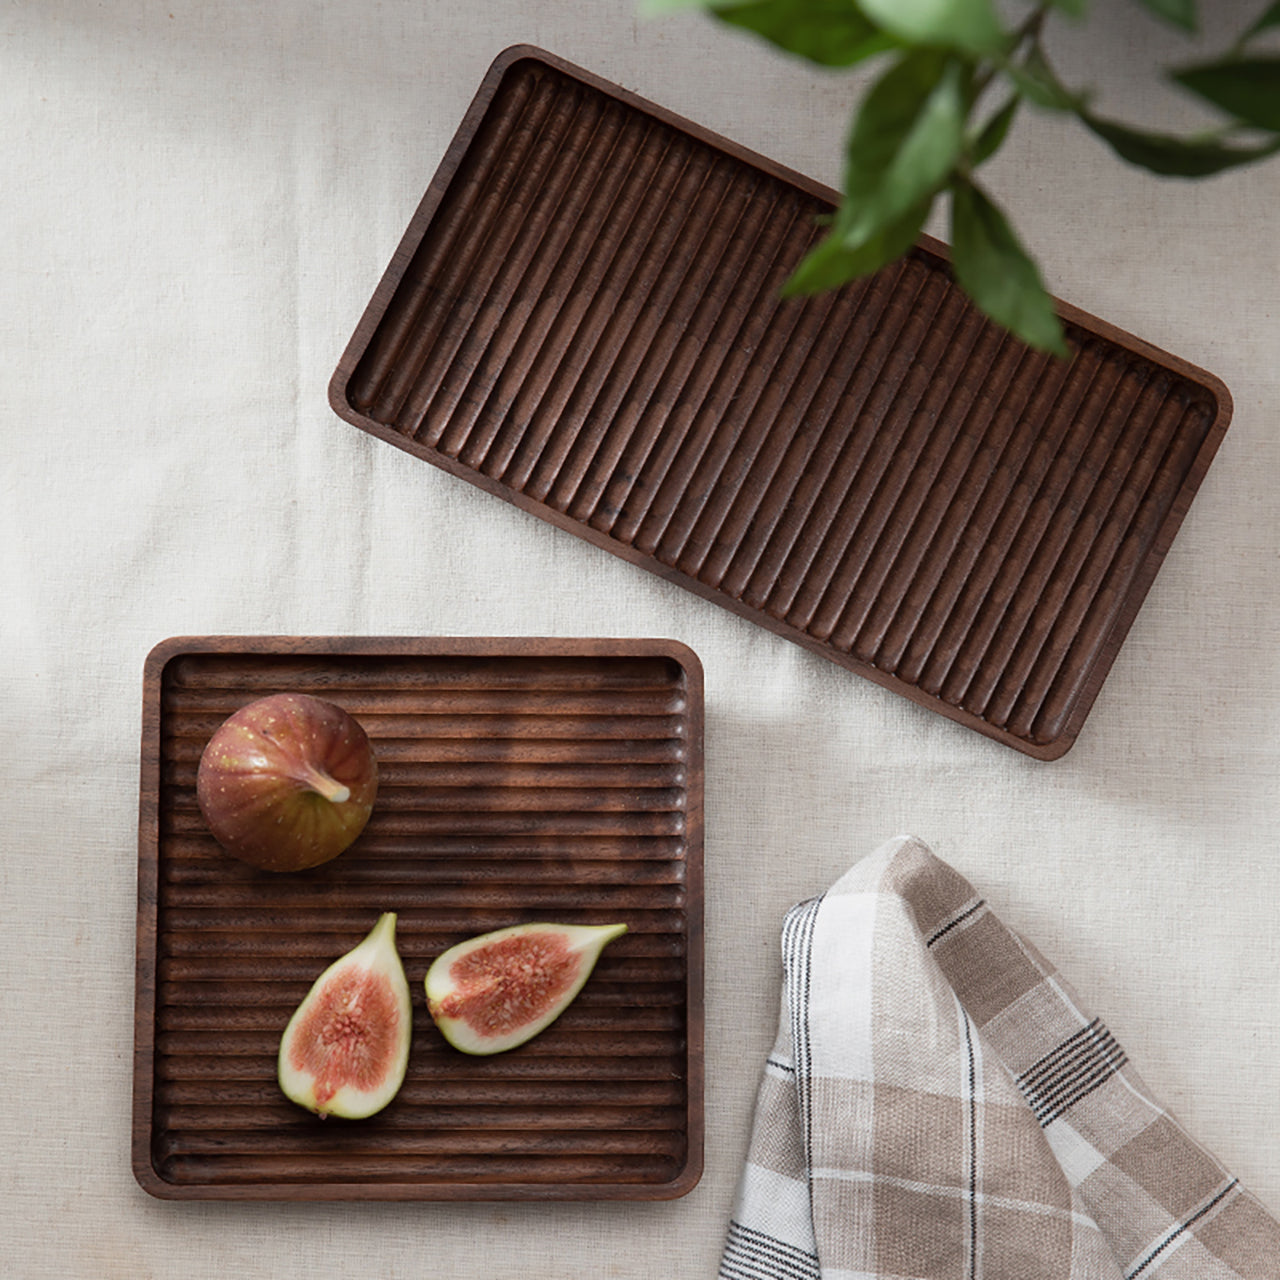 Shape Wooden Nested Serving Trays For Crafts Serving Pastries, Snacks, Mini Bars amiinu